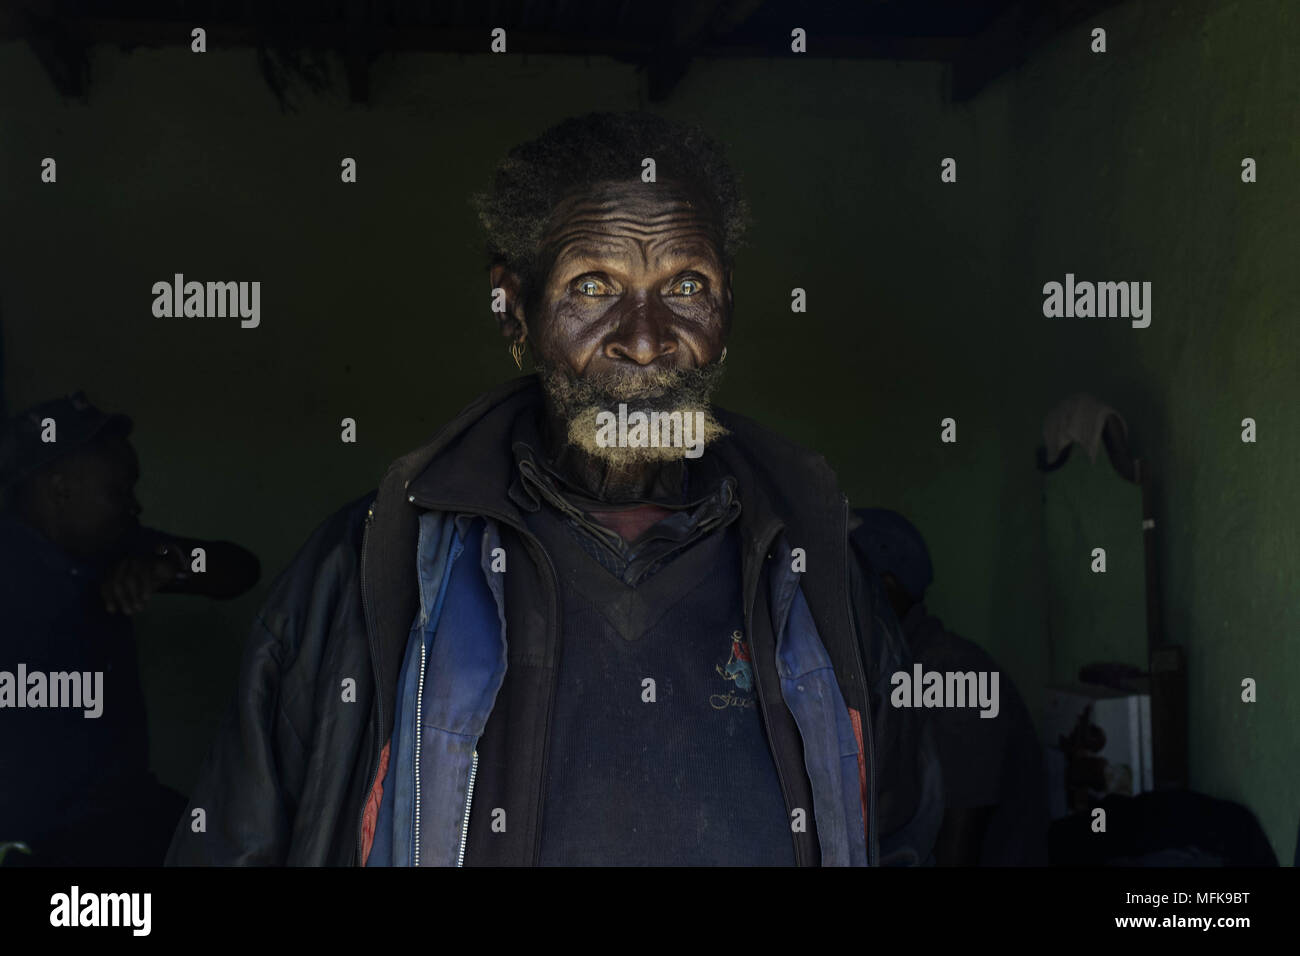 December 8, 2017 - Matatiele, Eastern Cape, South Africa - Malign, 87, attends an initiation ceremony. He worked his entire life underground, digging for gold in the mines of Johannesburg. Today, he needs care and help from the community to manage the daily routines. (Credit Image: © Stefan Kleinowitz via ZUMA Wire) Stock Photo